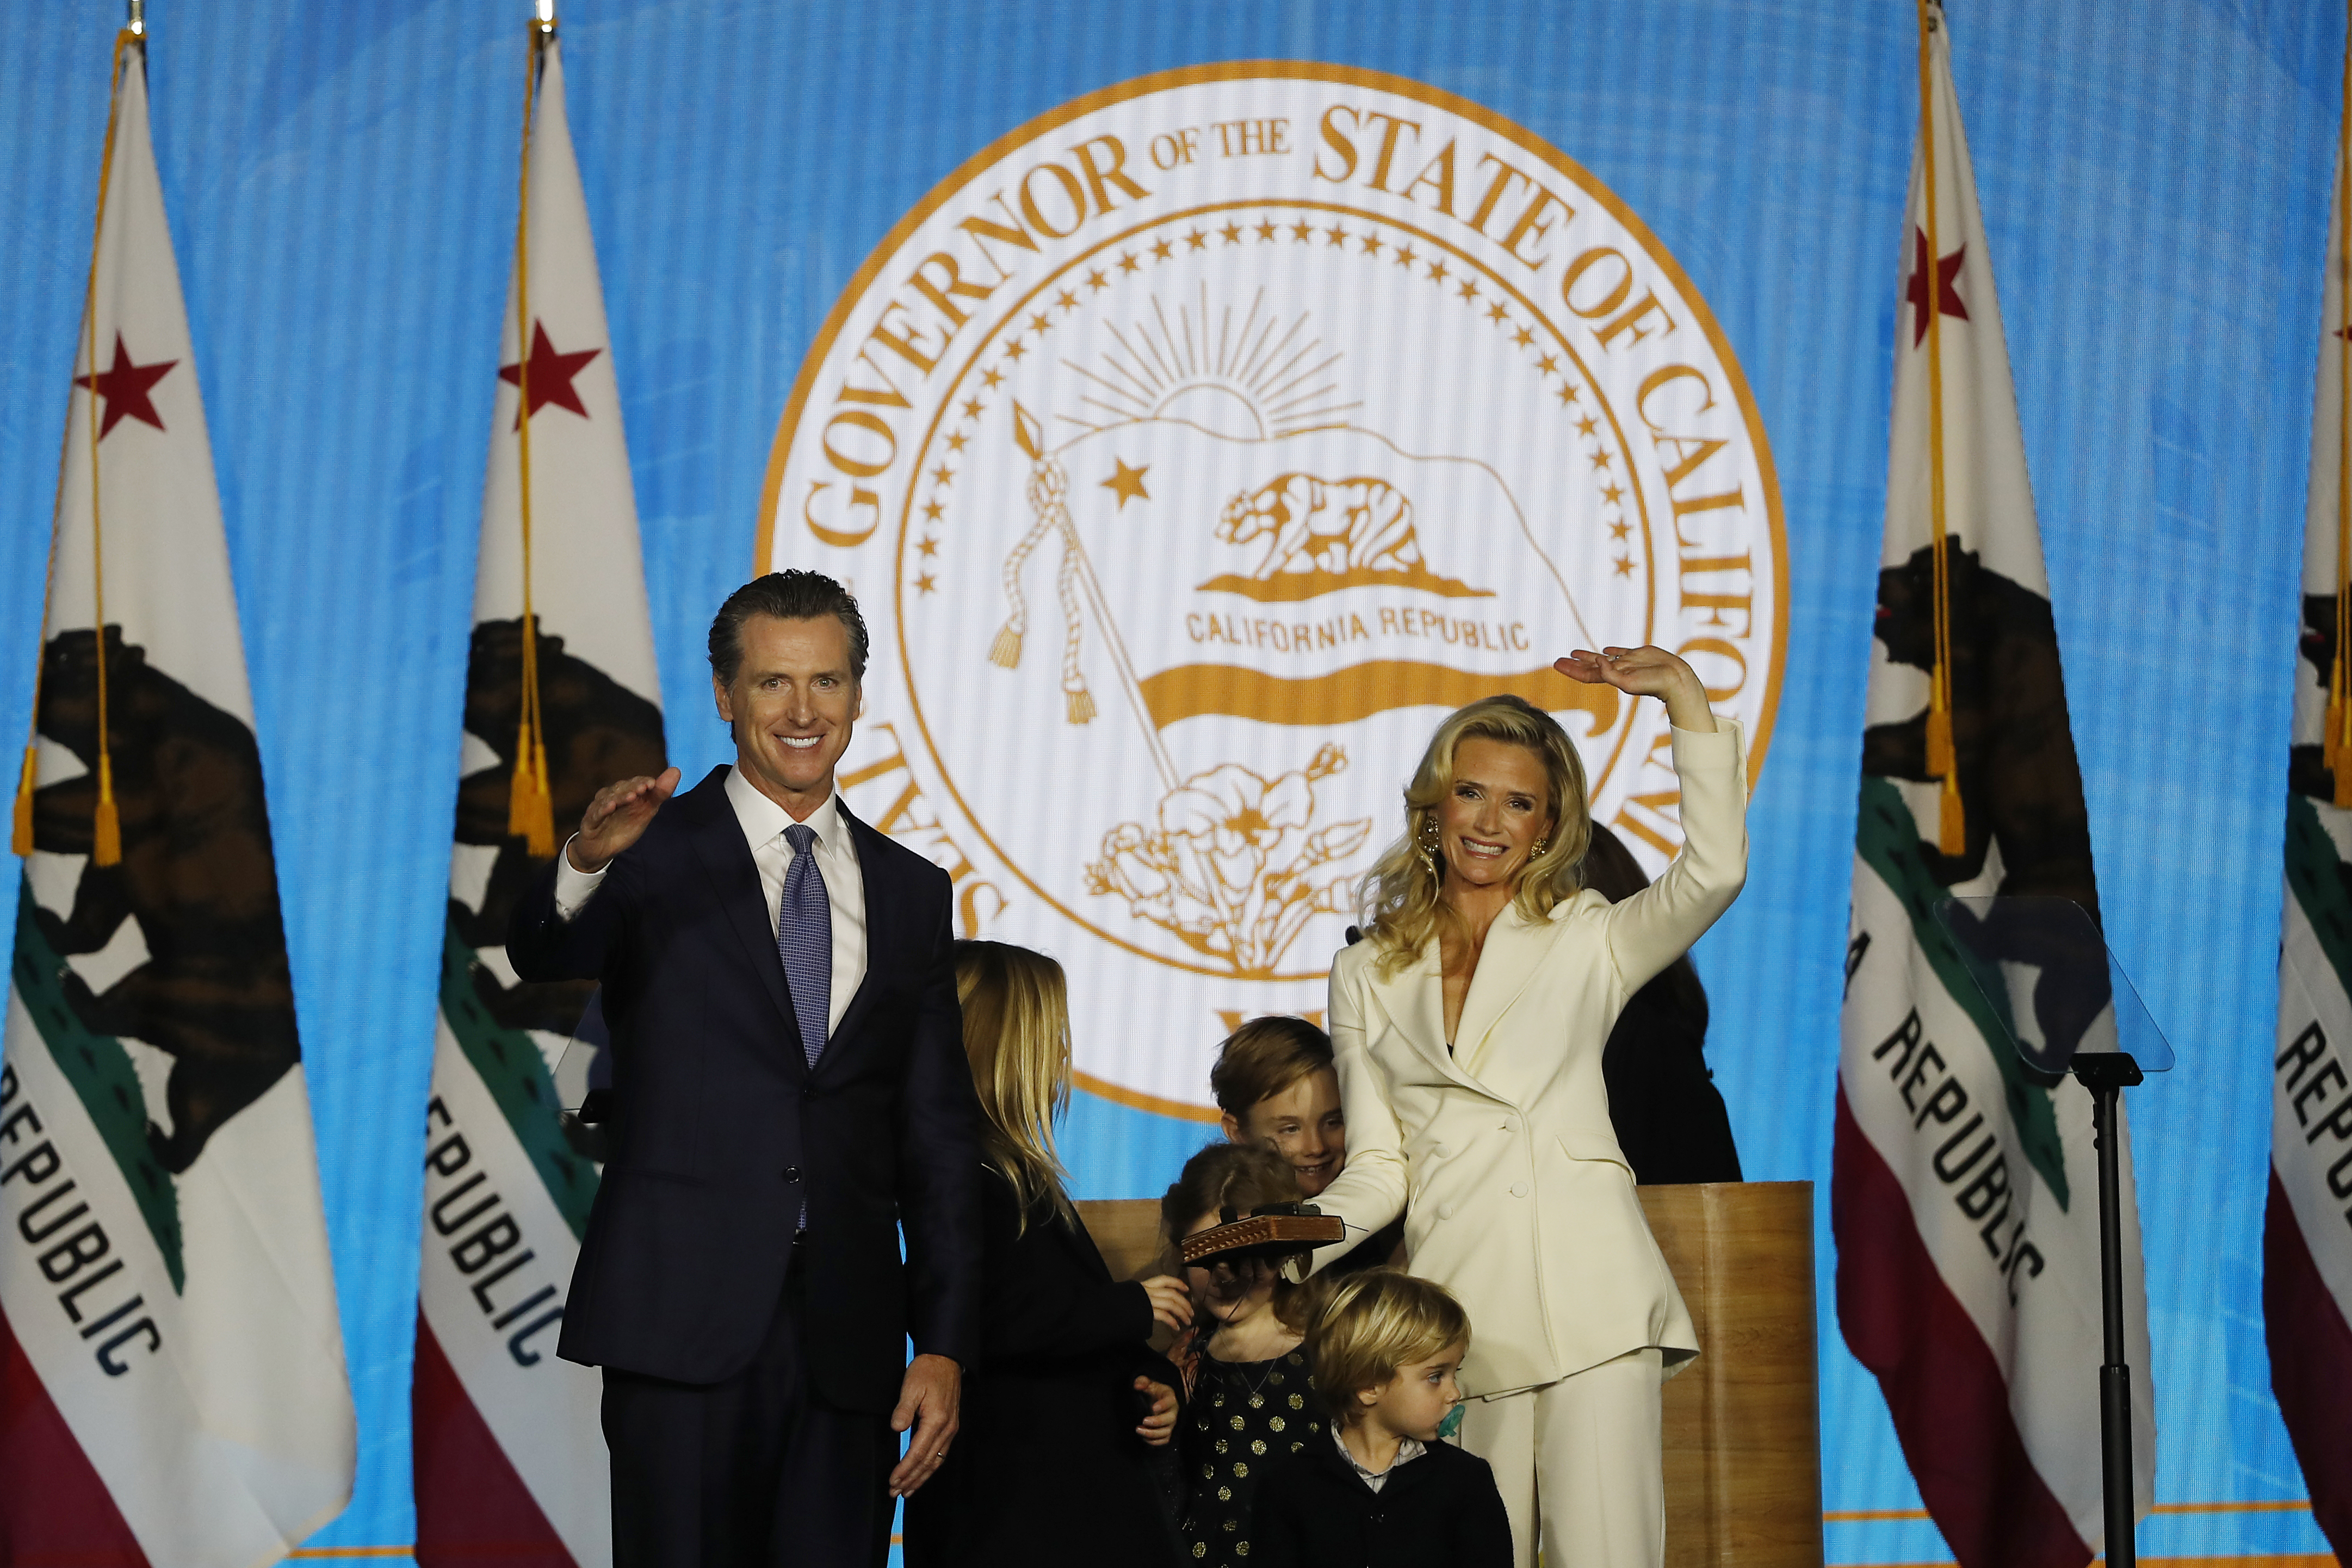 Governor Gavin Newsom and wife Jennifer Siebel Newsom gesture to the crowd after taking his oath of office on Jan. 7, 2019 in Sacramento, Calif. (Stephen Lam—Getty Images)